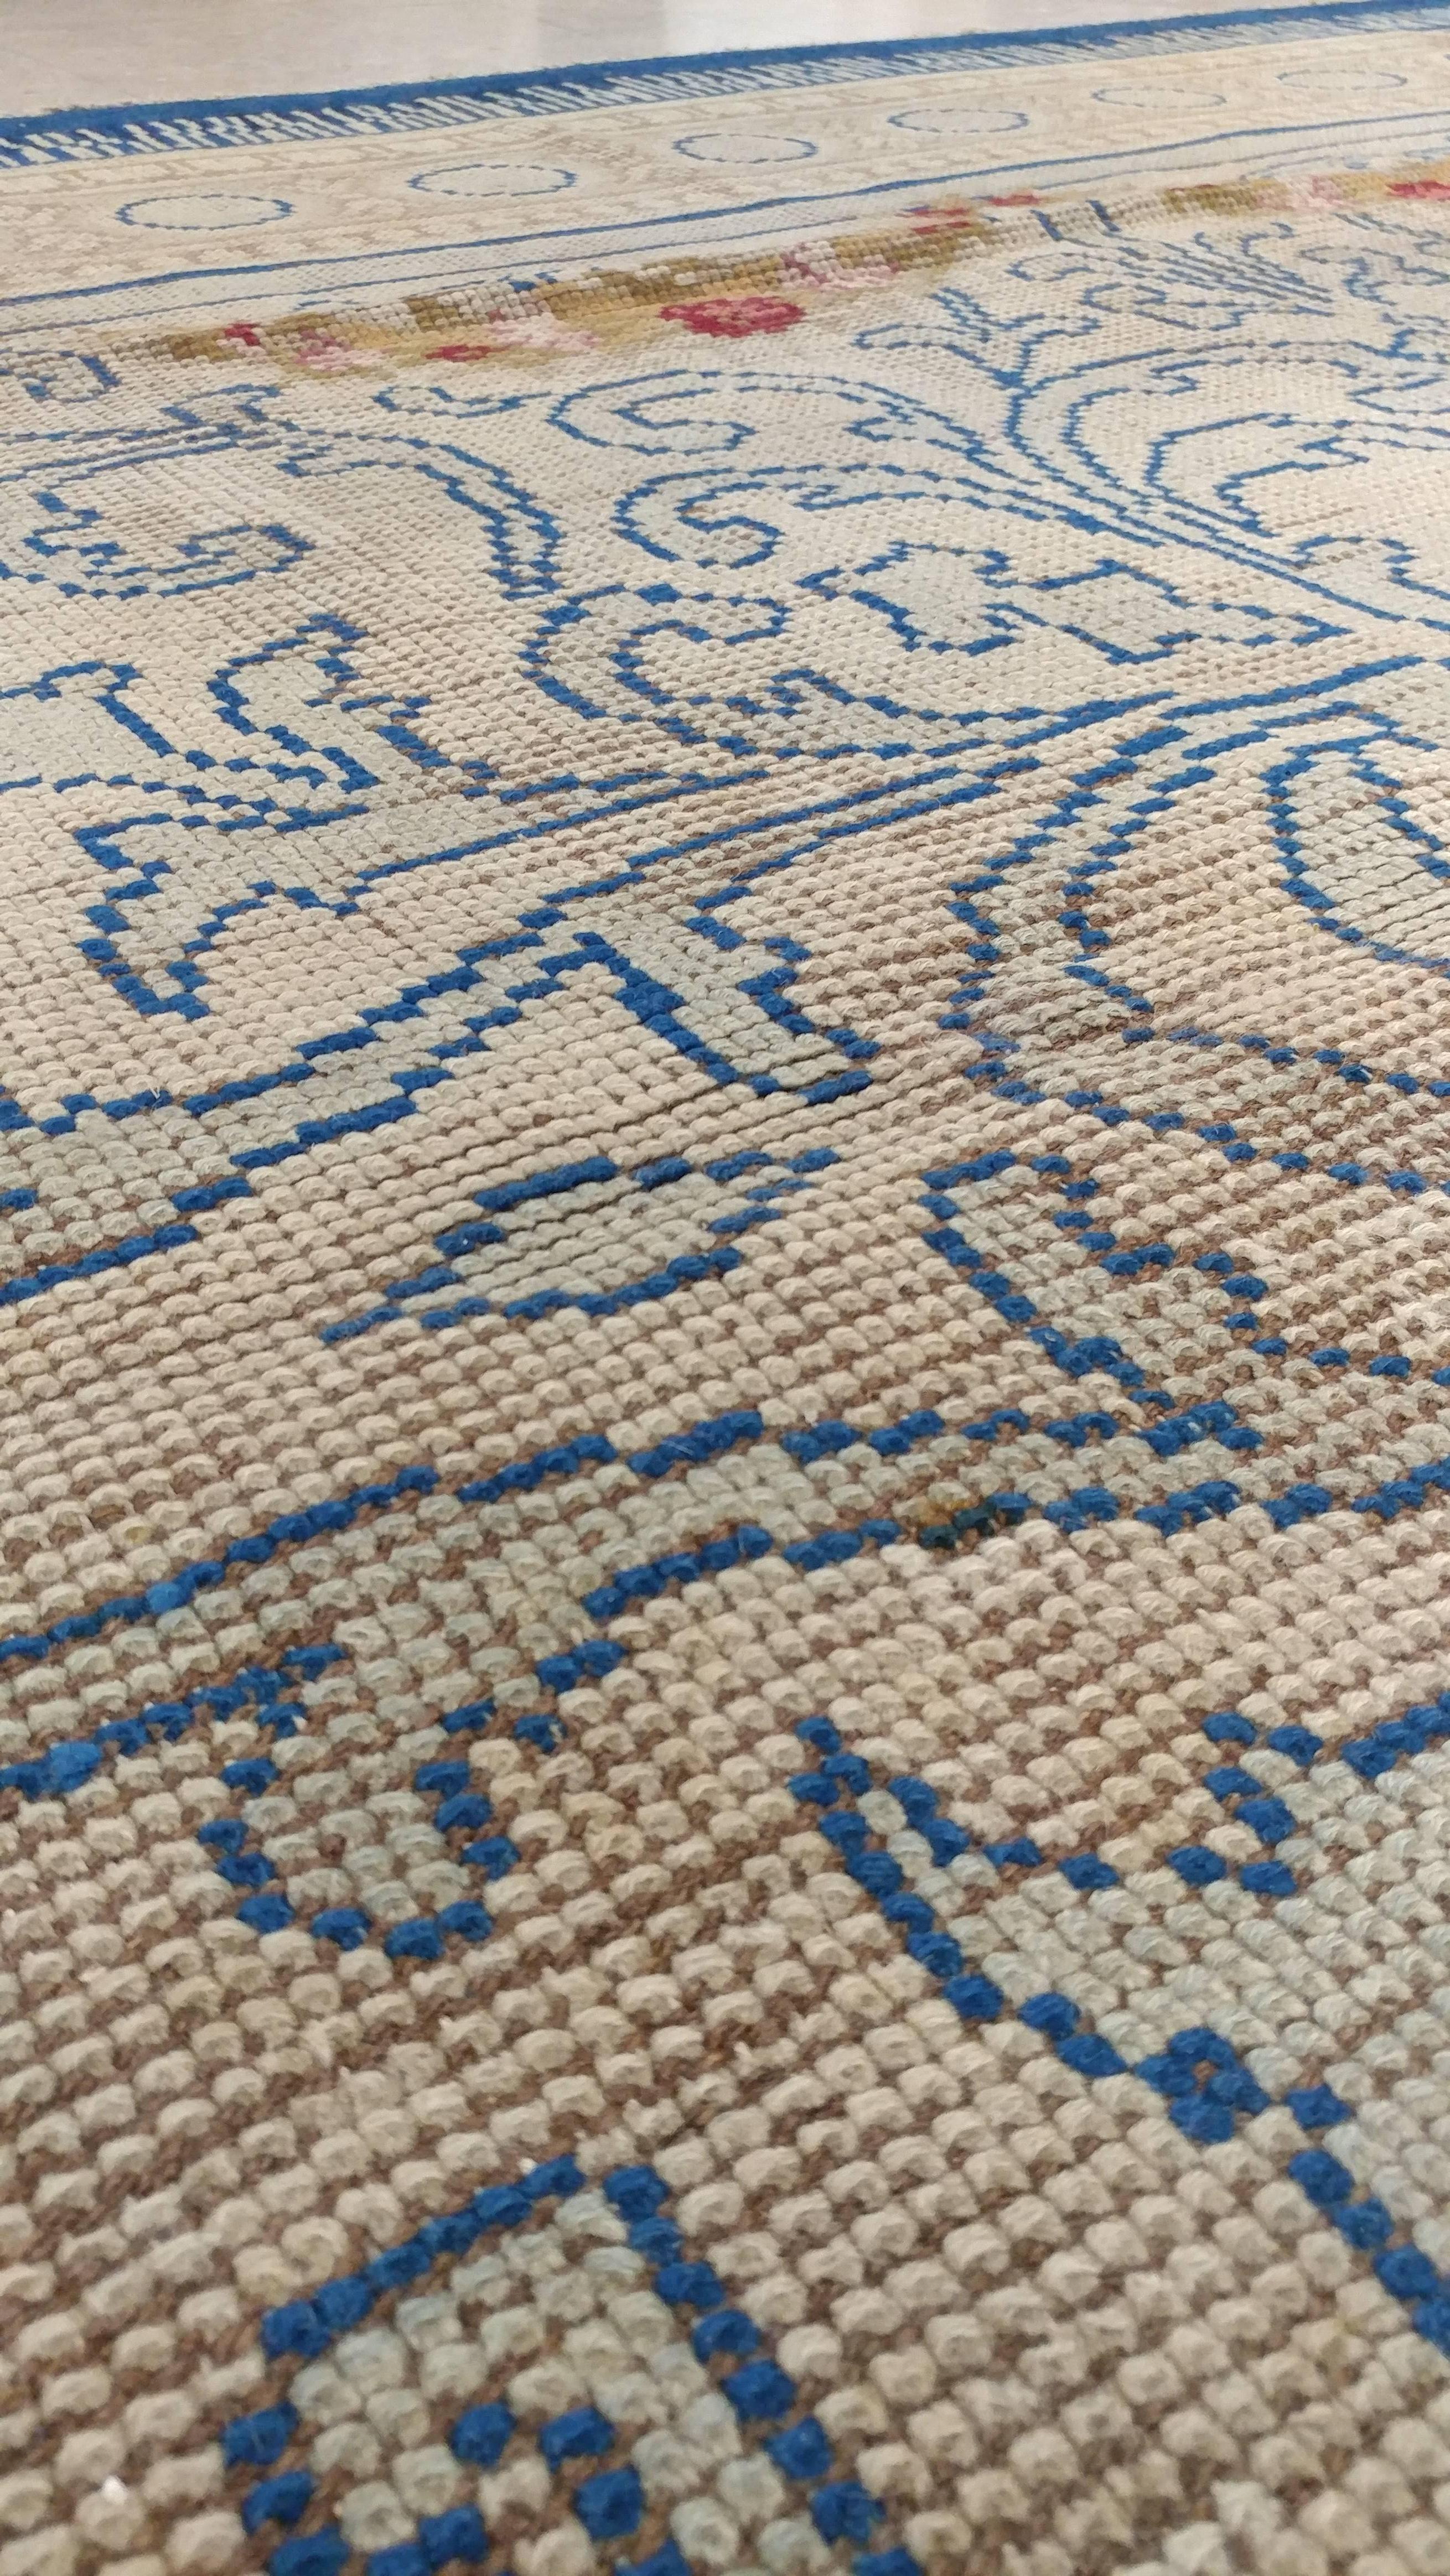 Antique English Carpet, Finely Woven Blue Cream Carpet, Blue Rug, Hand-Knotted 1